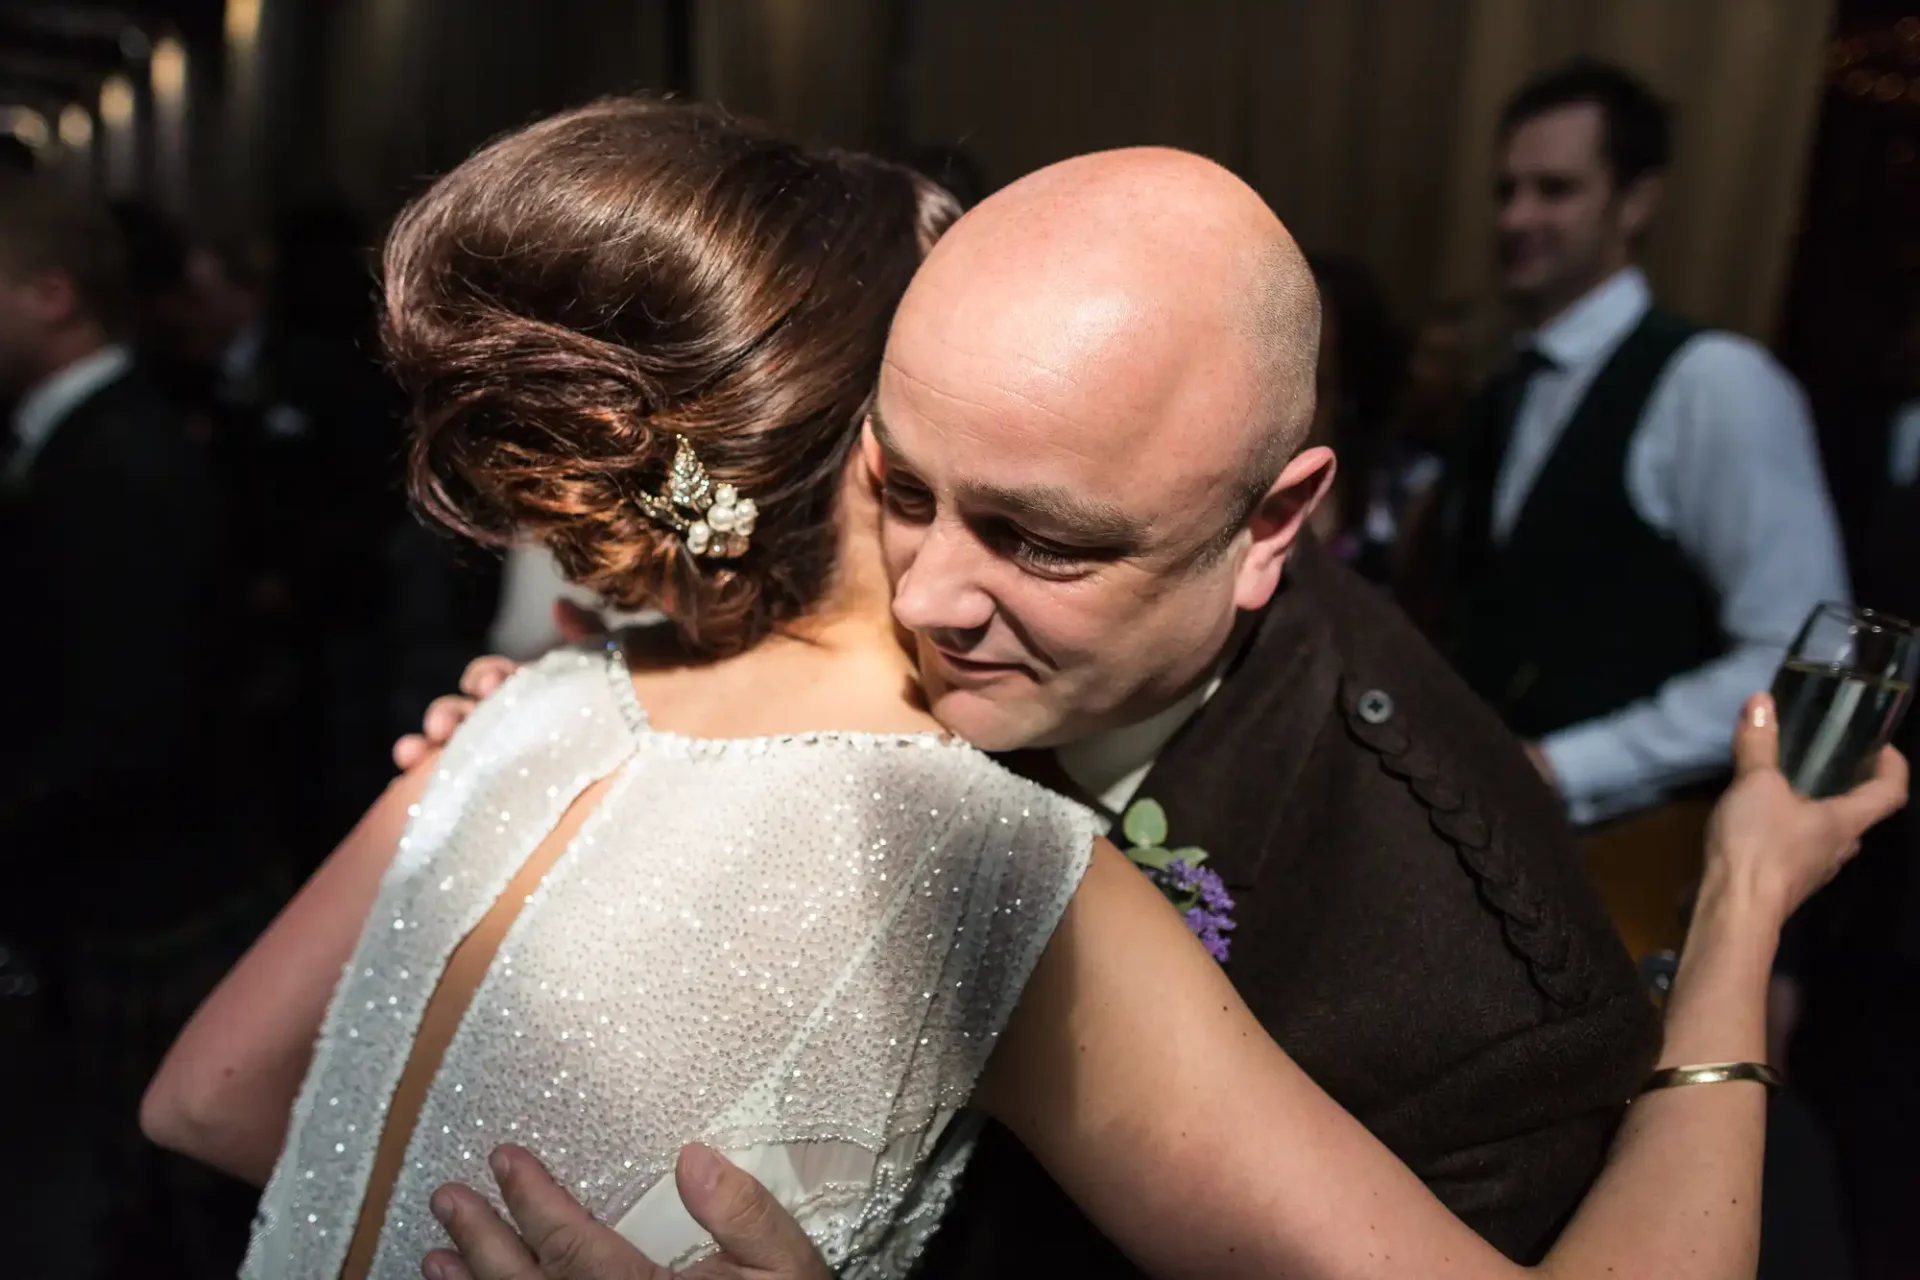 A man in a formal vest embraces a woman in a sequined wedding dress, both share a tender moment during a dimly lit reception.